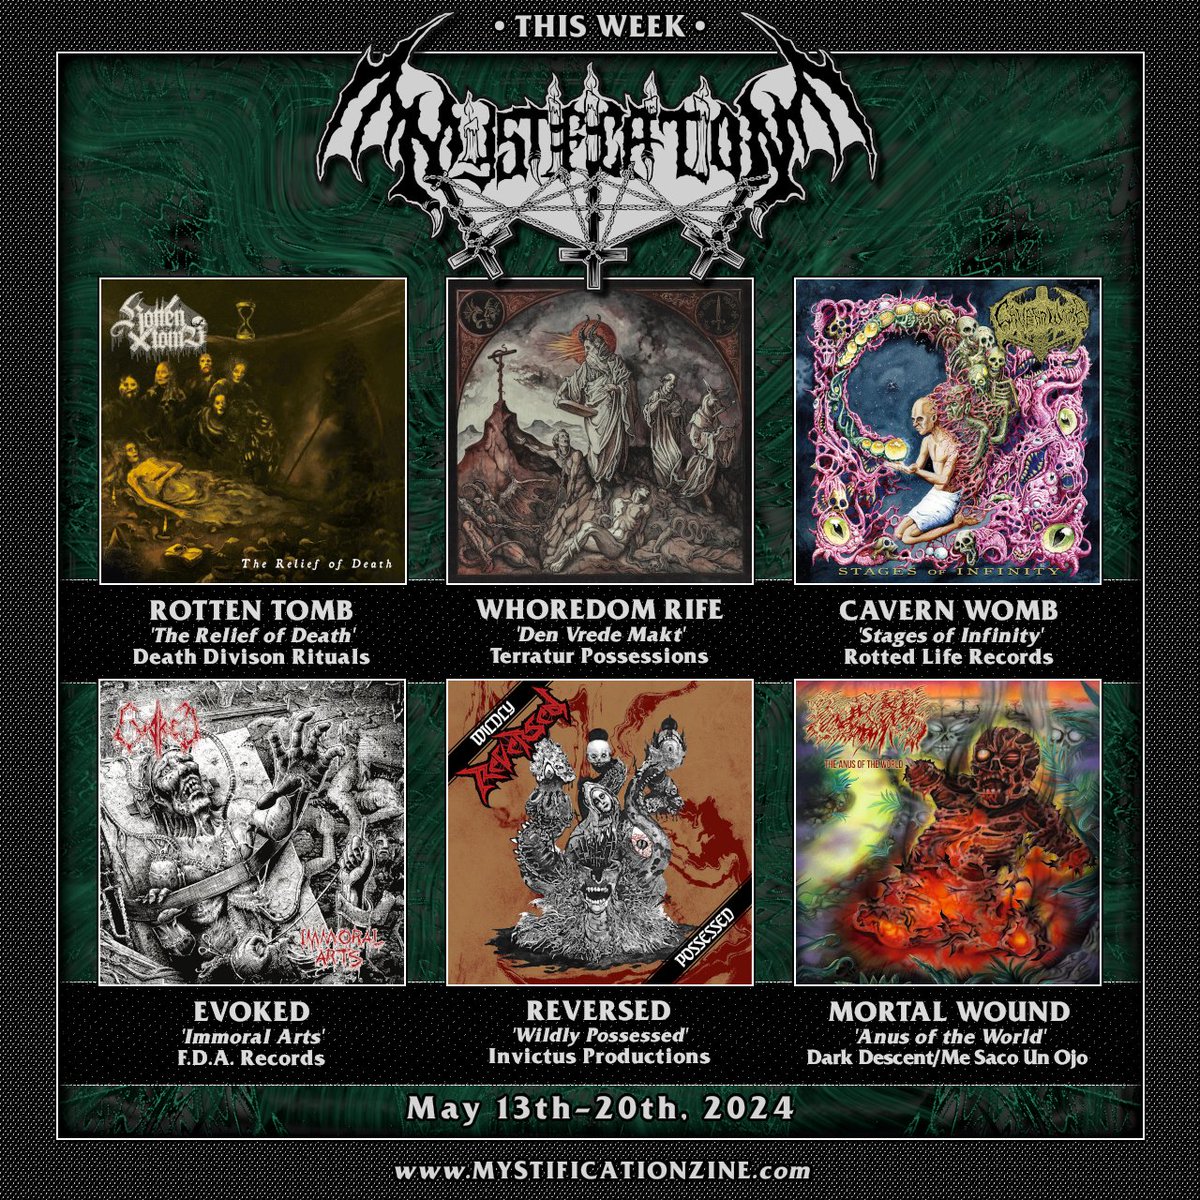 THIS WEEK: [May 13th-20th, 2024] on MystificationZine.com Upcoming Reviews for: ROTTEN TOMB, CAVERN WOMB, REVERSED, EVOKED, WHOREDOM RIFE, MORTAL WOUND, SOTHERION. Short Reviews 5/14 Thanks for reading.